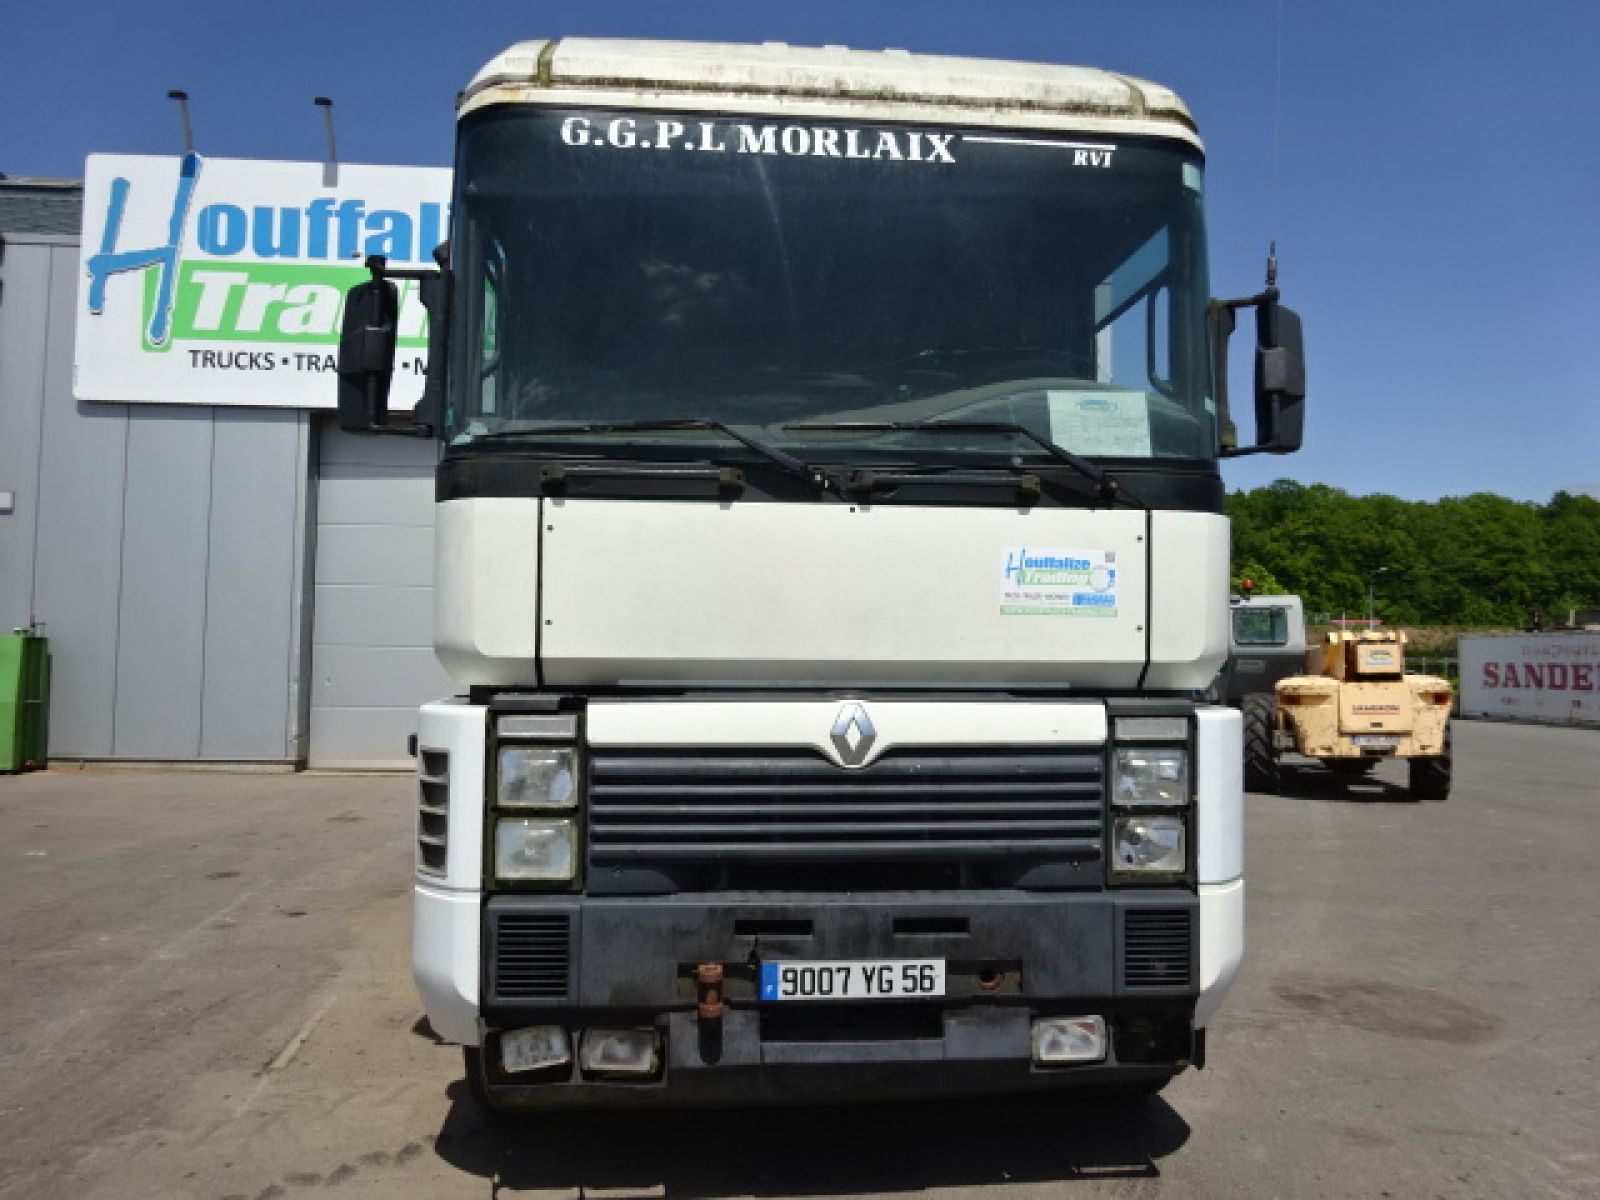  Unidades tractoras - RENAULT MAGNUM 440  Tracteur (Belgique - Europe) - Houffalize Trading s.a.